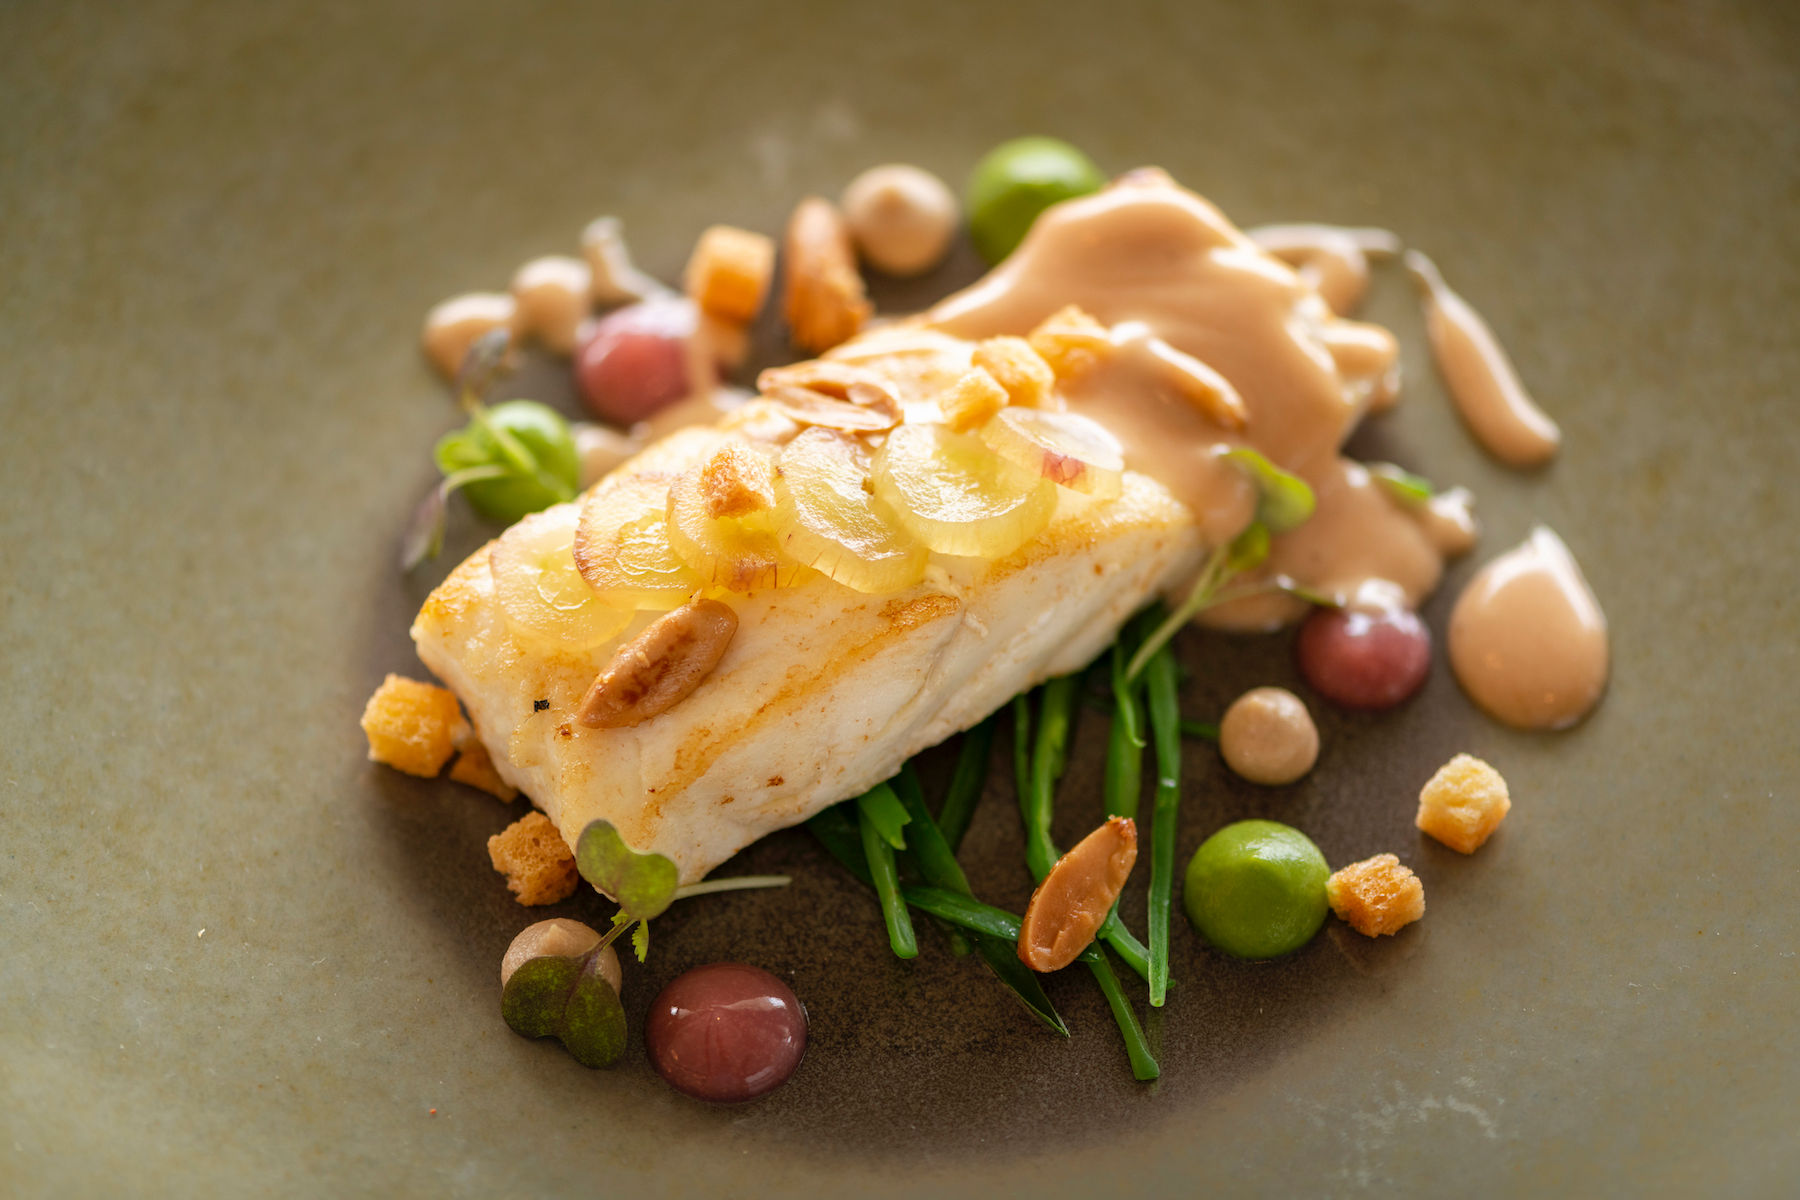 Dining Spotlight: Exclusive Lunch and Dinner by Chef Alain Roux at Le Normandie